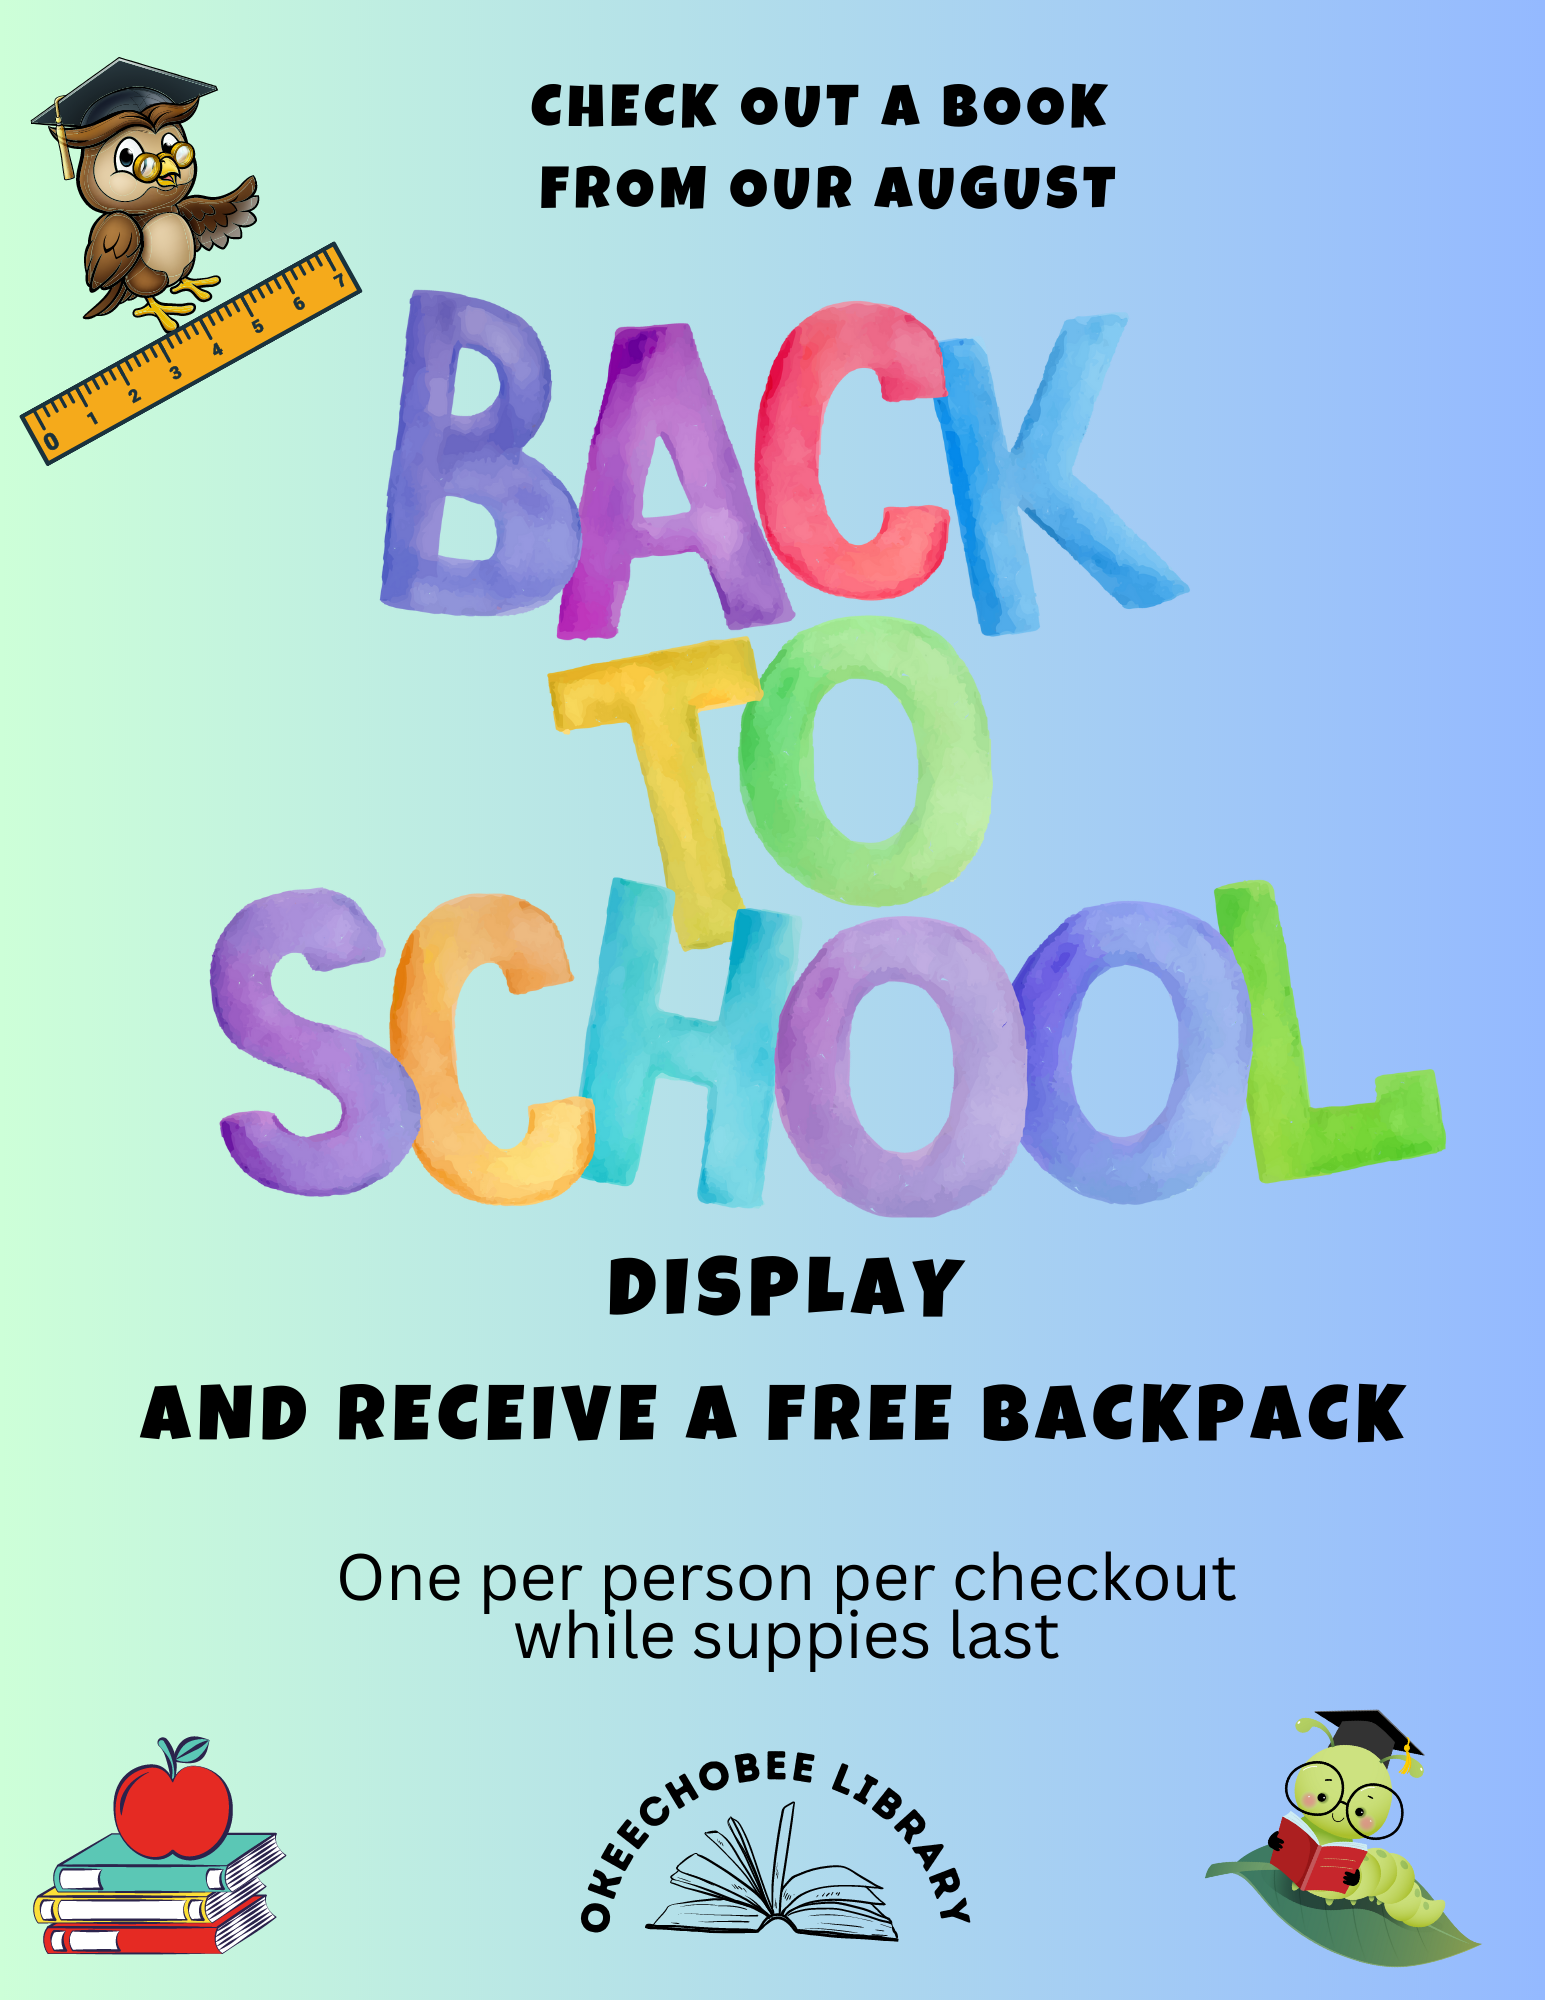 Check out a book from our August Back to School display and receive a free backpack. While supplies last.